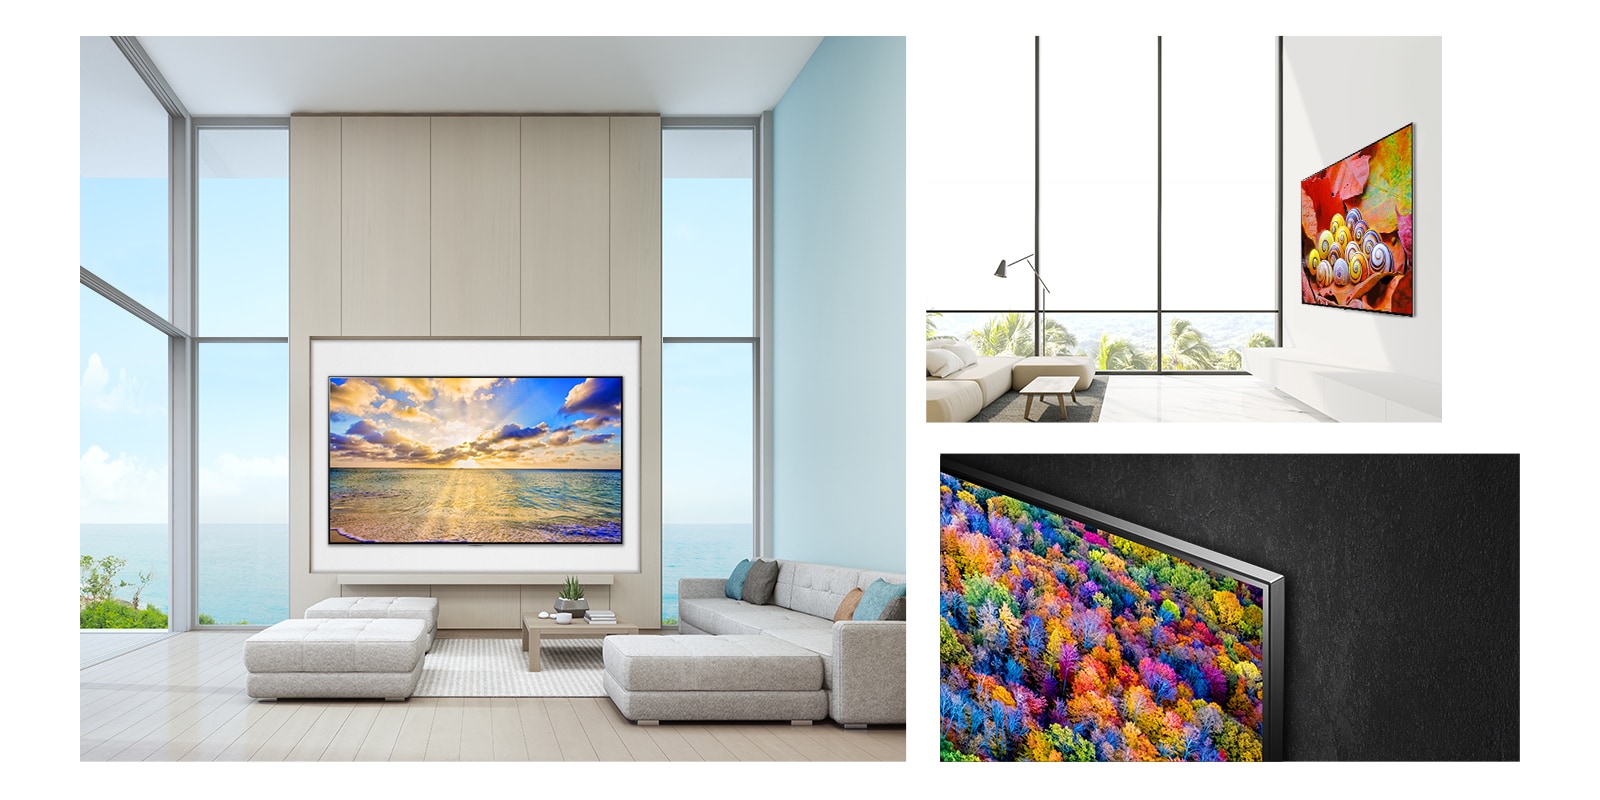 Make your LG NanoCell the centerpiece of any room with a Gallery TV design